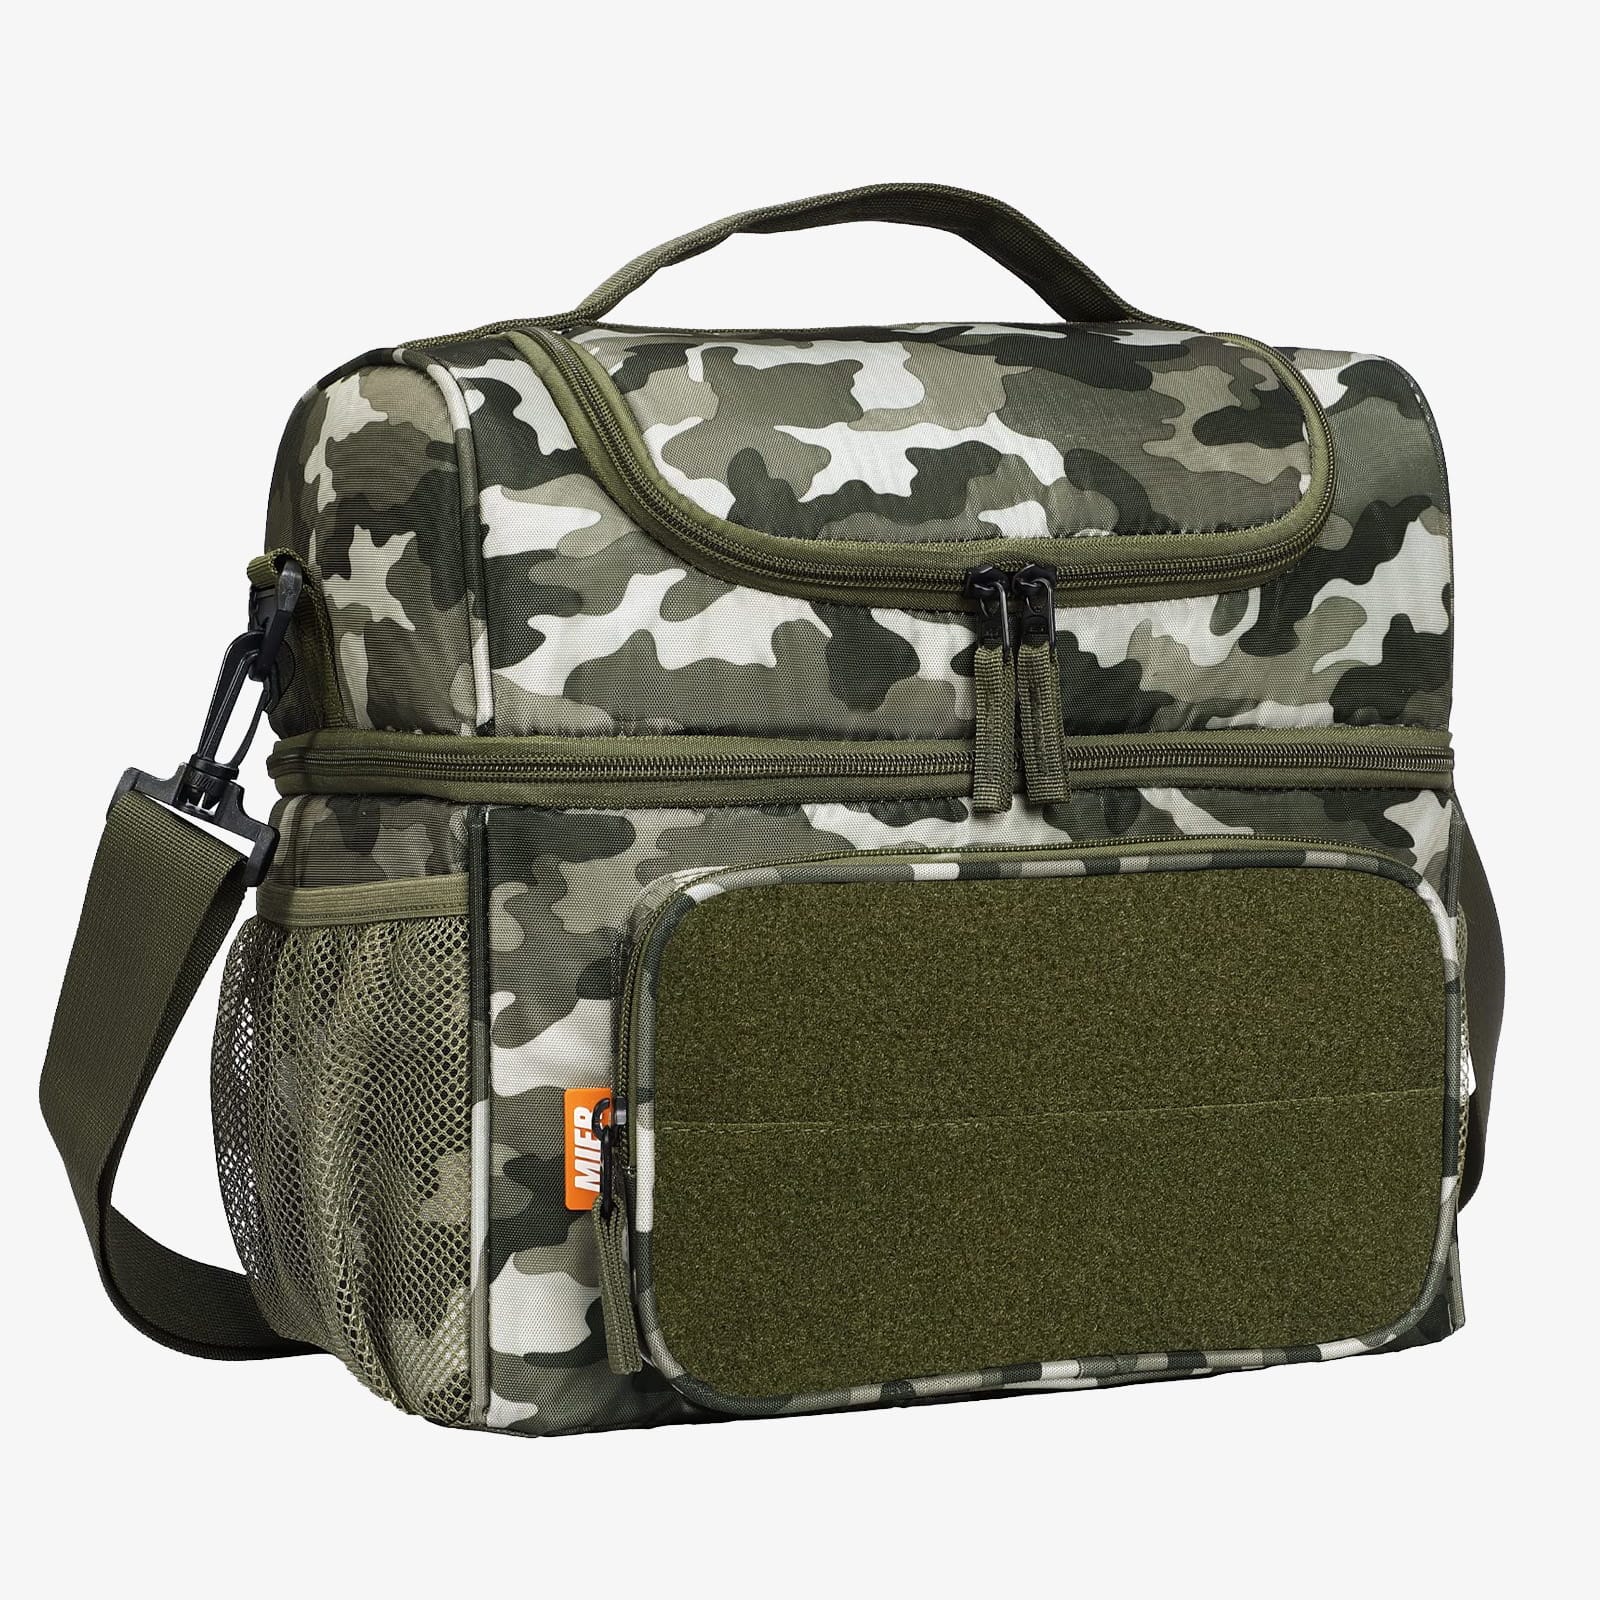 Insulated Lunch Bag Coolers with Shoulder Strap Adult Lunch Bag Camo with MOLLE MIER